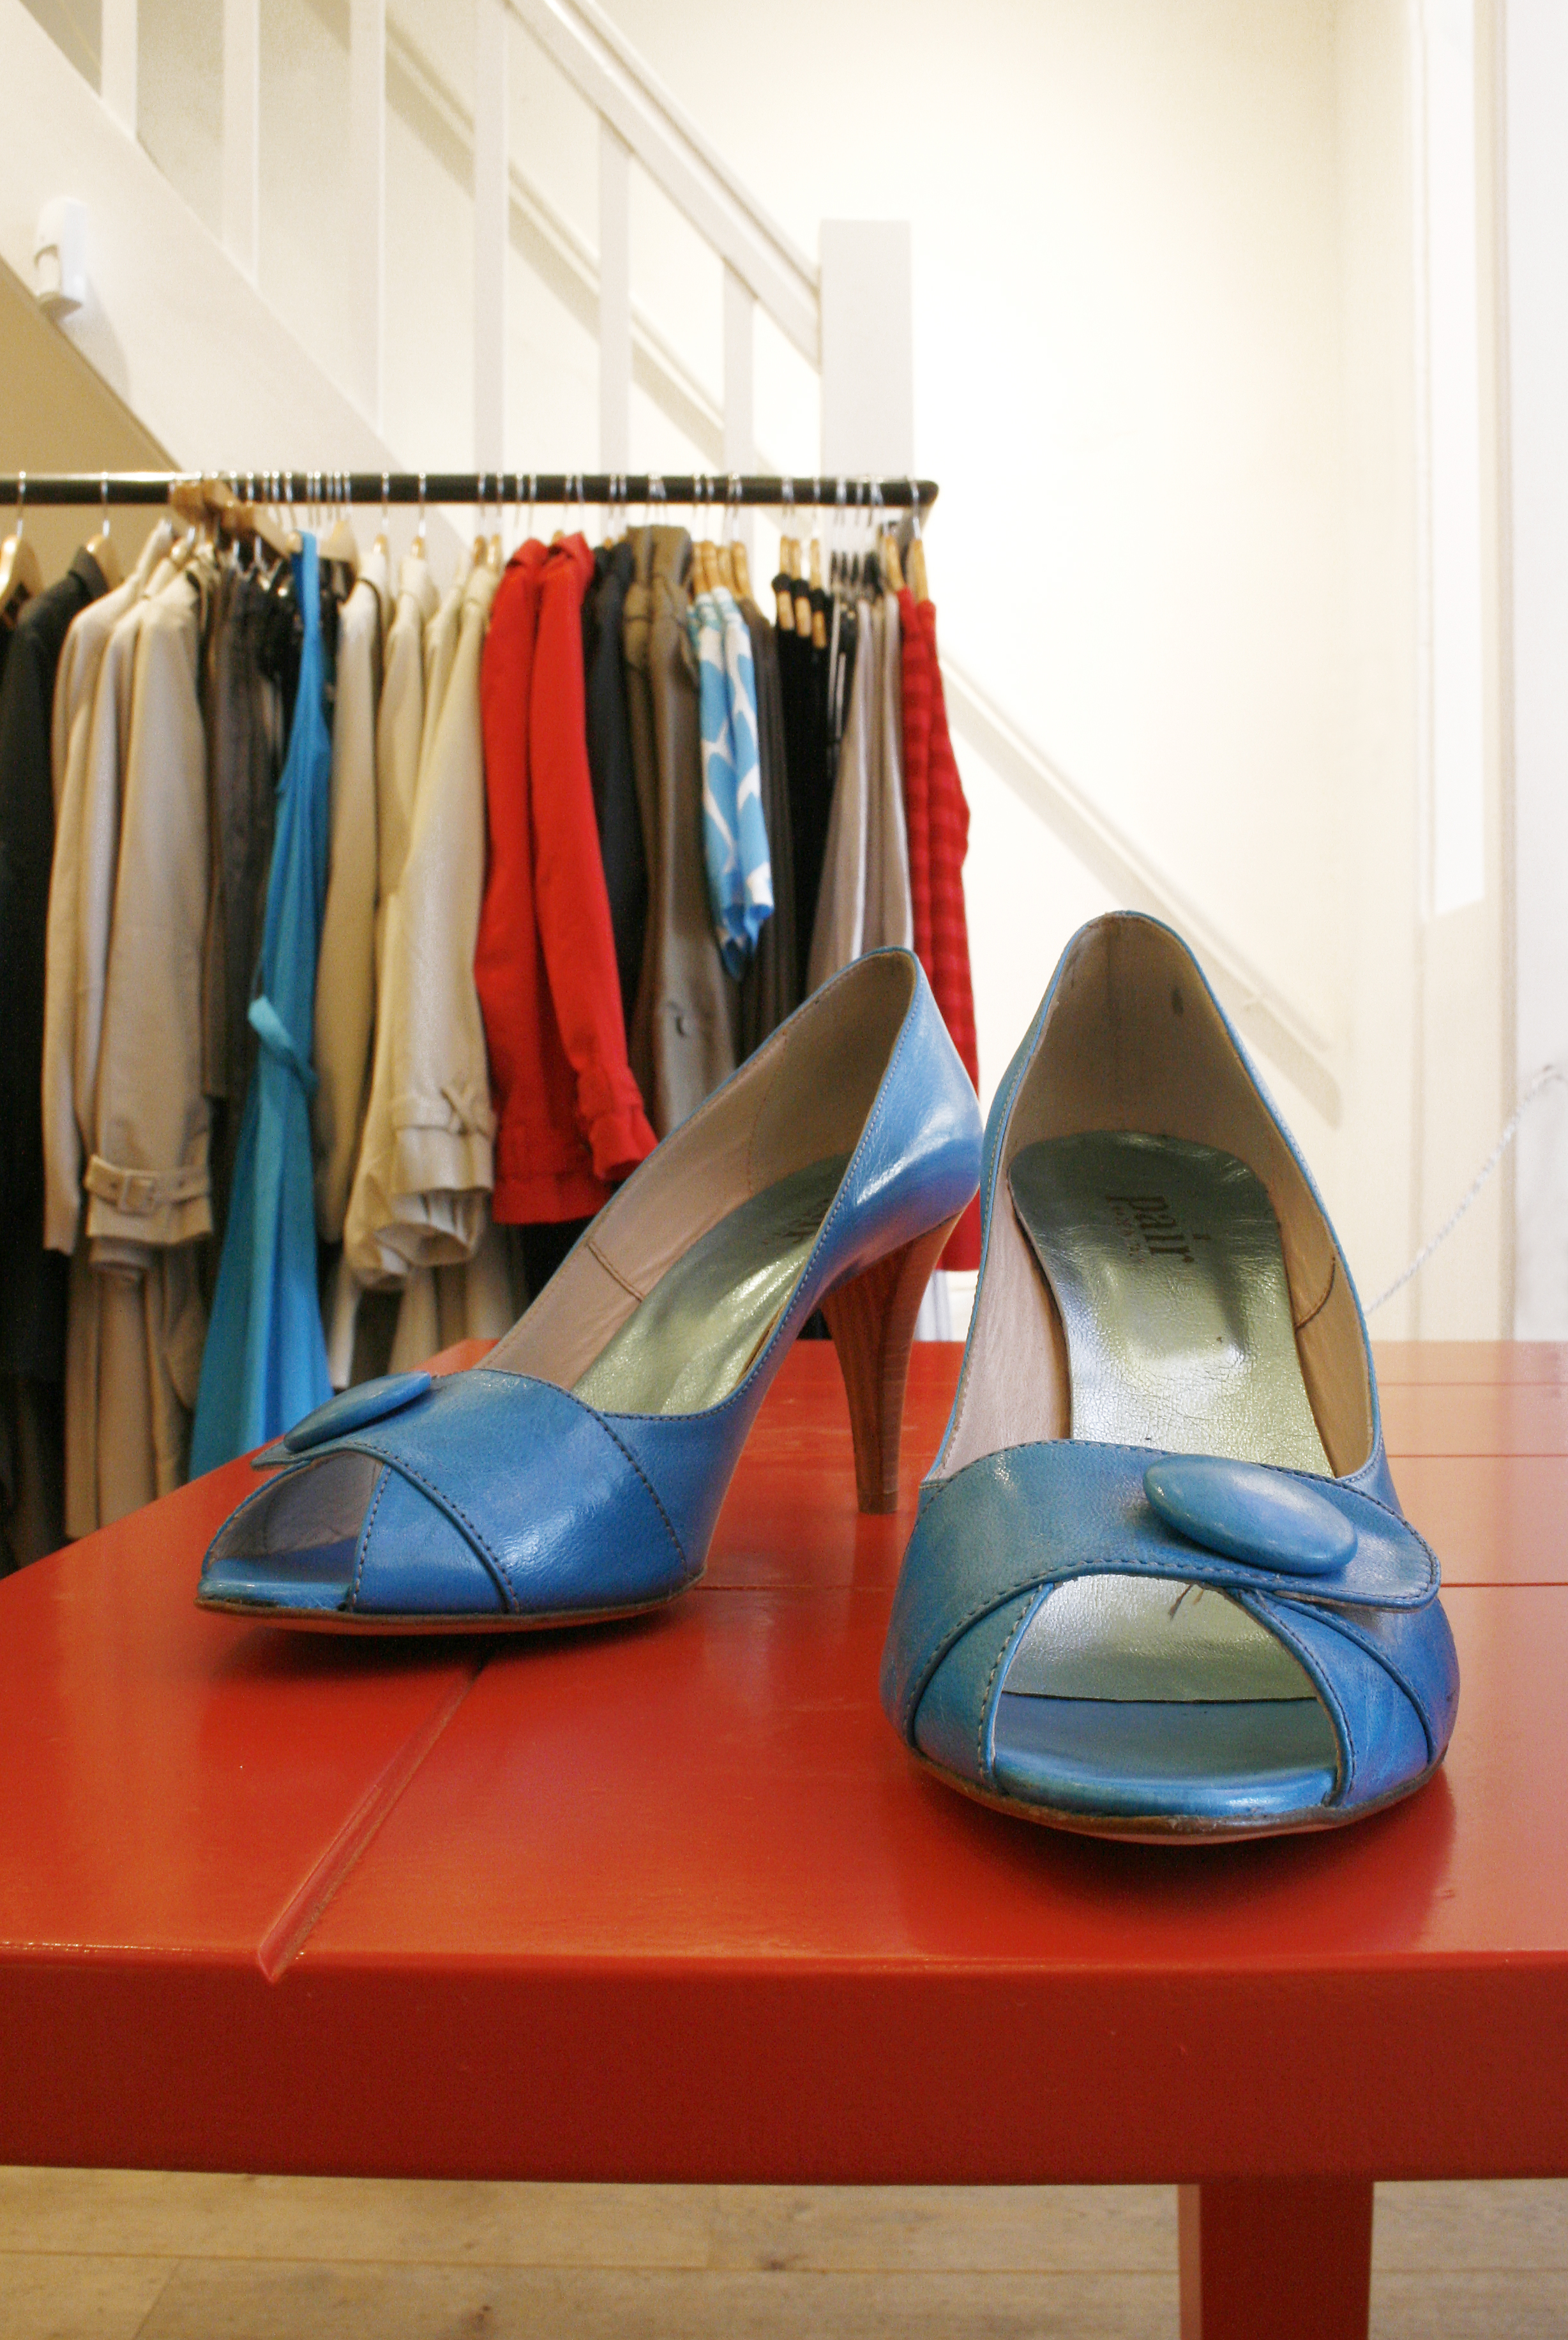 Shoe display in shop, Blue, Clothes, Clothing, Display, HQ Photo